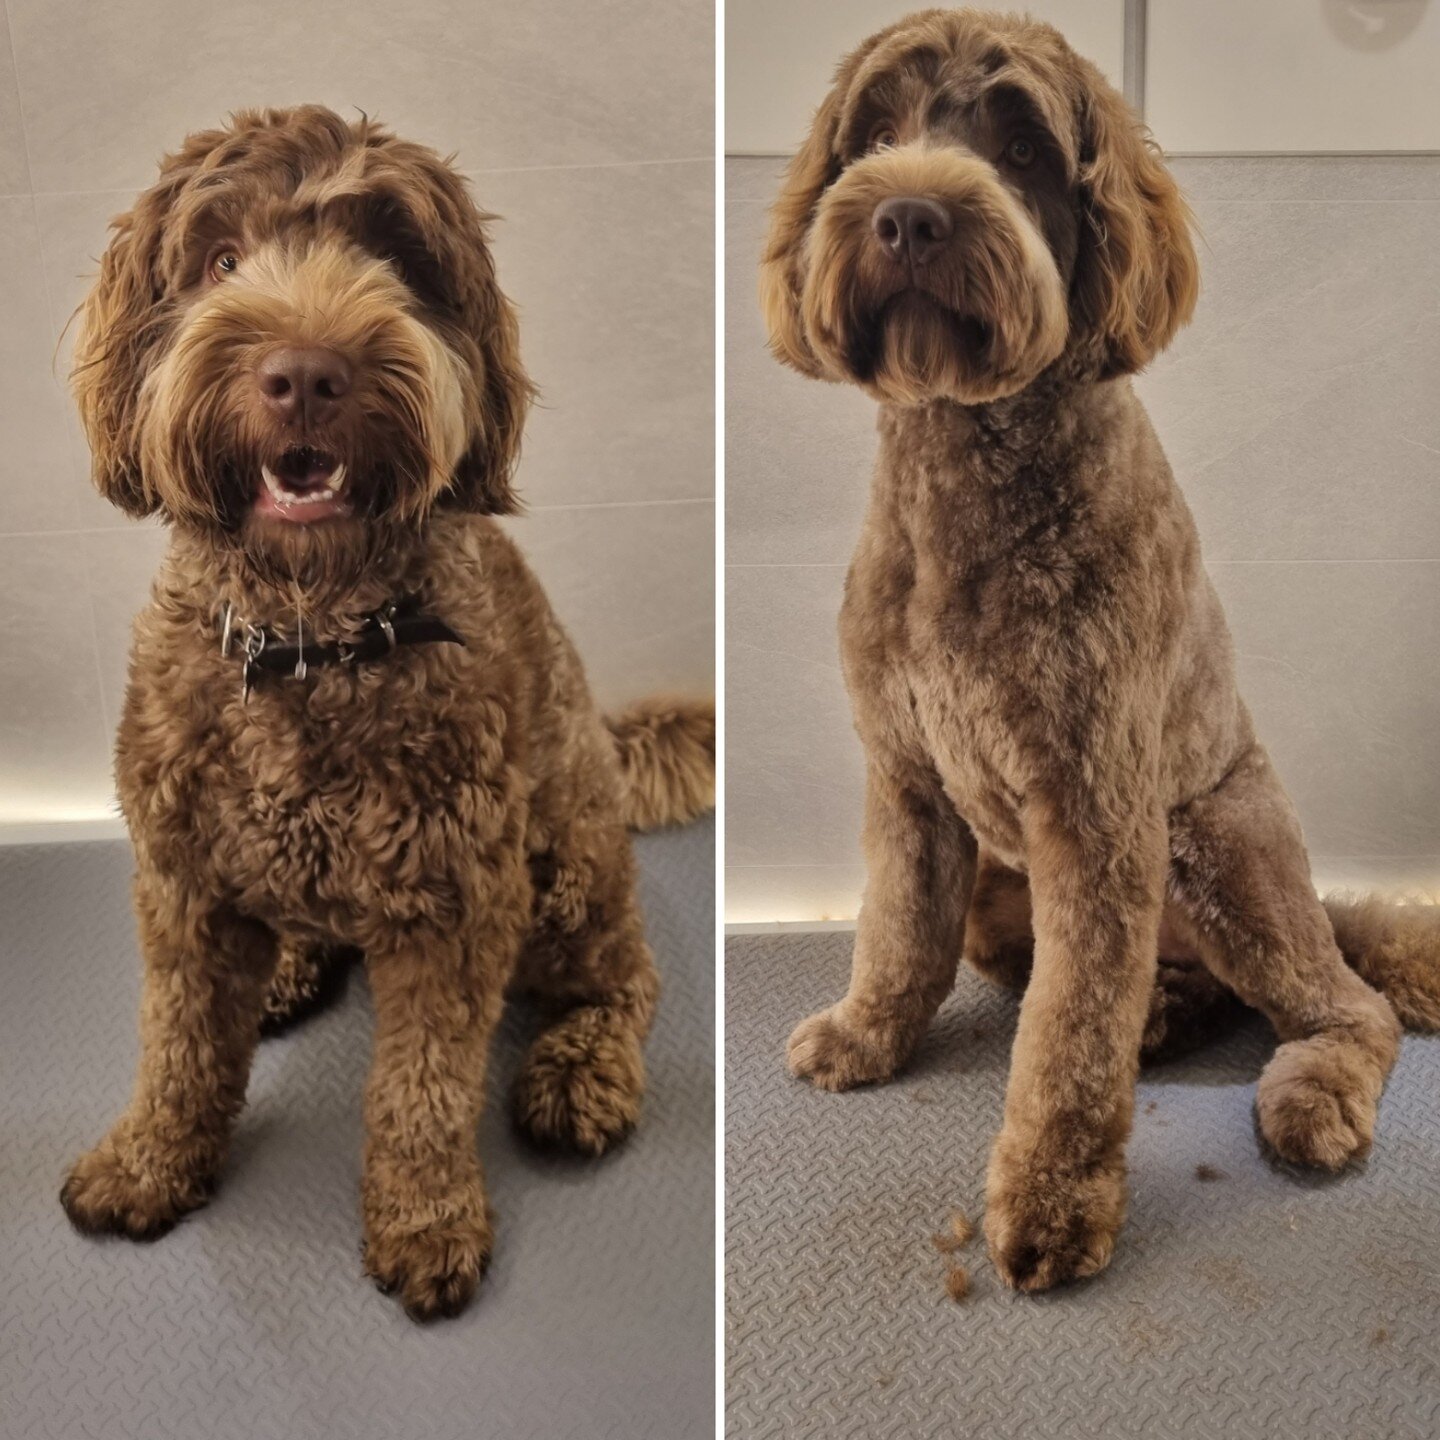 Louie the cobberdog had a very exciting day yesterday. He got to go to work with his parent, while at work he had a nice spa day with a bath and trim! 🛁✂️ Louie is ready to rock the rest of the work week. 🤘 Takk for bes&oslash;ket Louie. 🥰

You ca